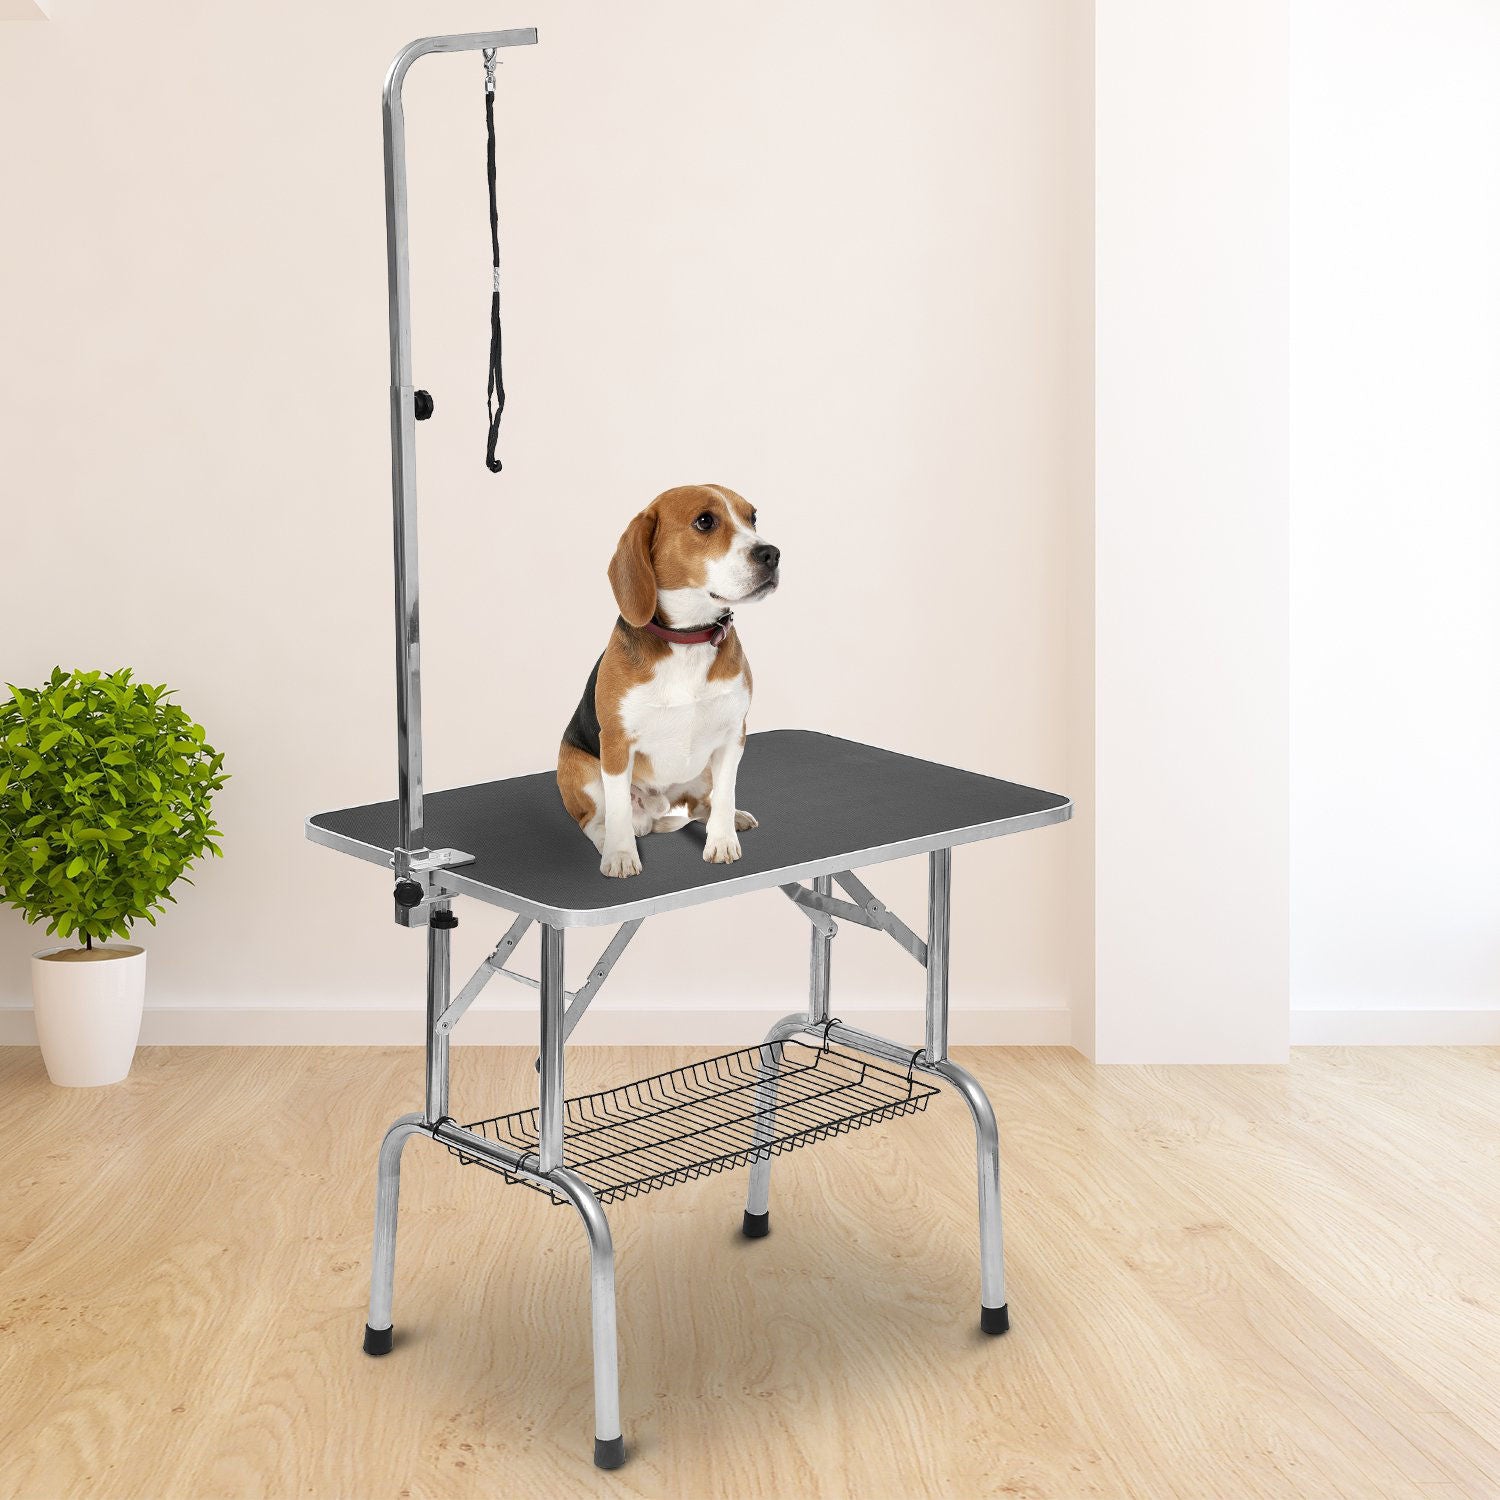 Nancy's The Hill Grooming table, Shaving table, Dog grooming table foldable height adjustable Stainless steel